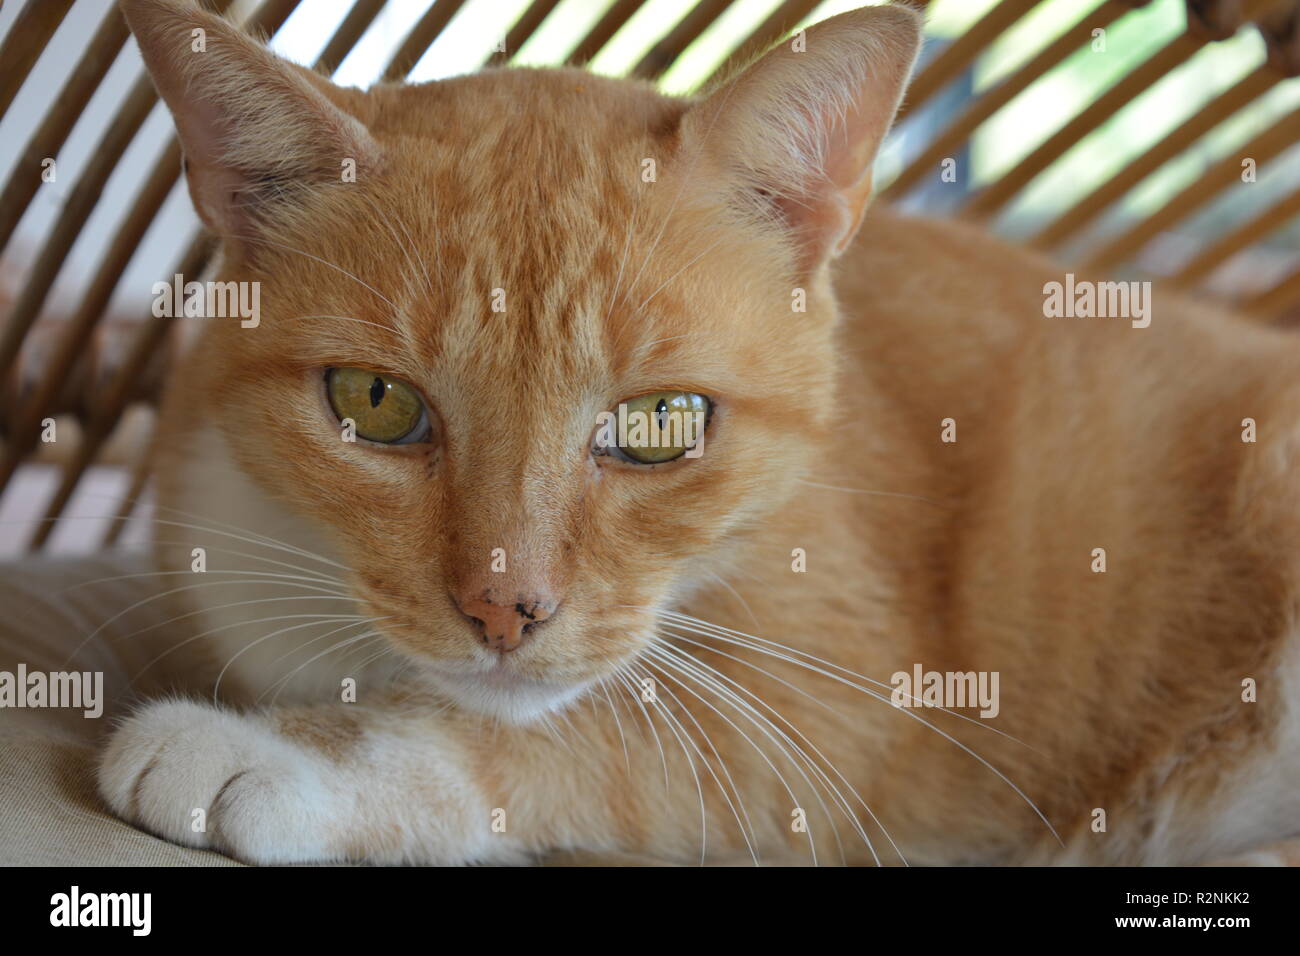 Ginger marmalade cat with yellow eyes, portrait, looking at camera Stock Photo